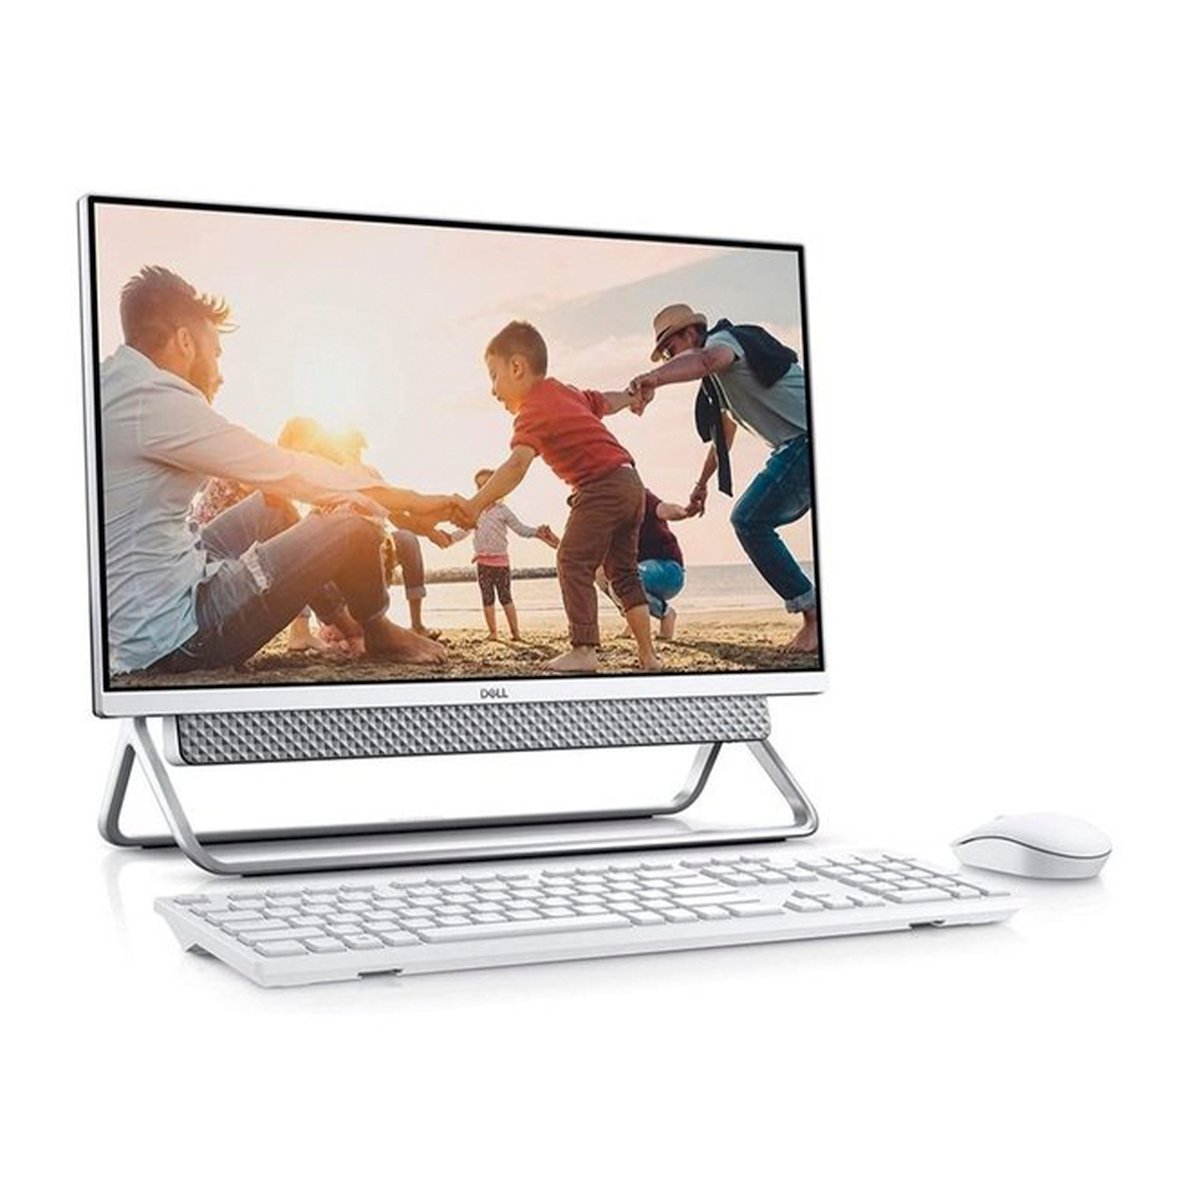 Dell All-in-One Desktop-5400-INS-6000-SLV-Corei7-1165G7,16GBRAM,1TB HDD,256 GB SSD,23.8" FHD Touch Display,Windows 10,Silver